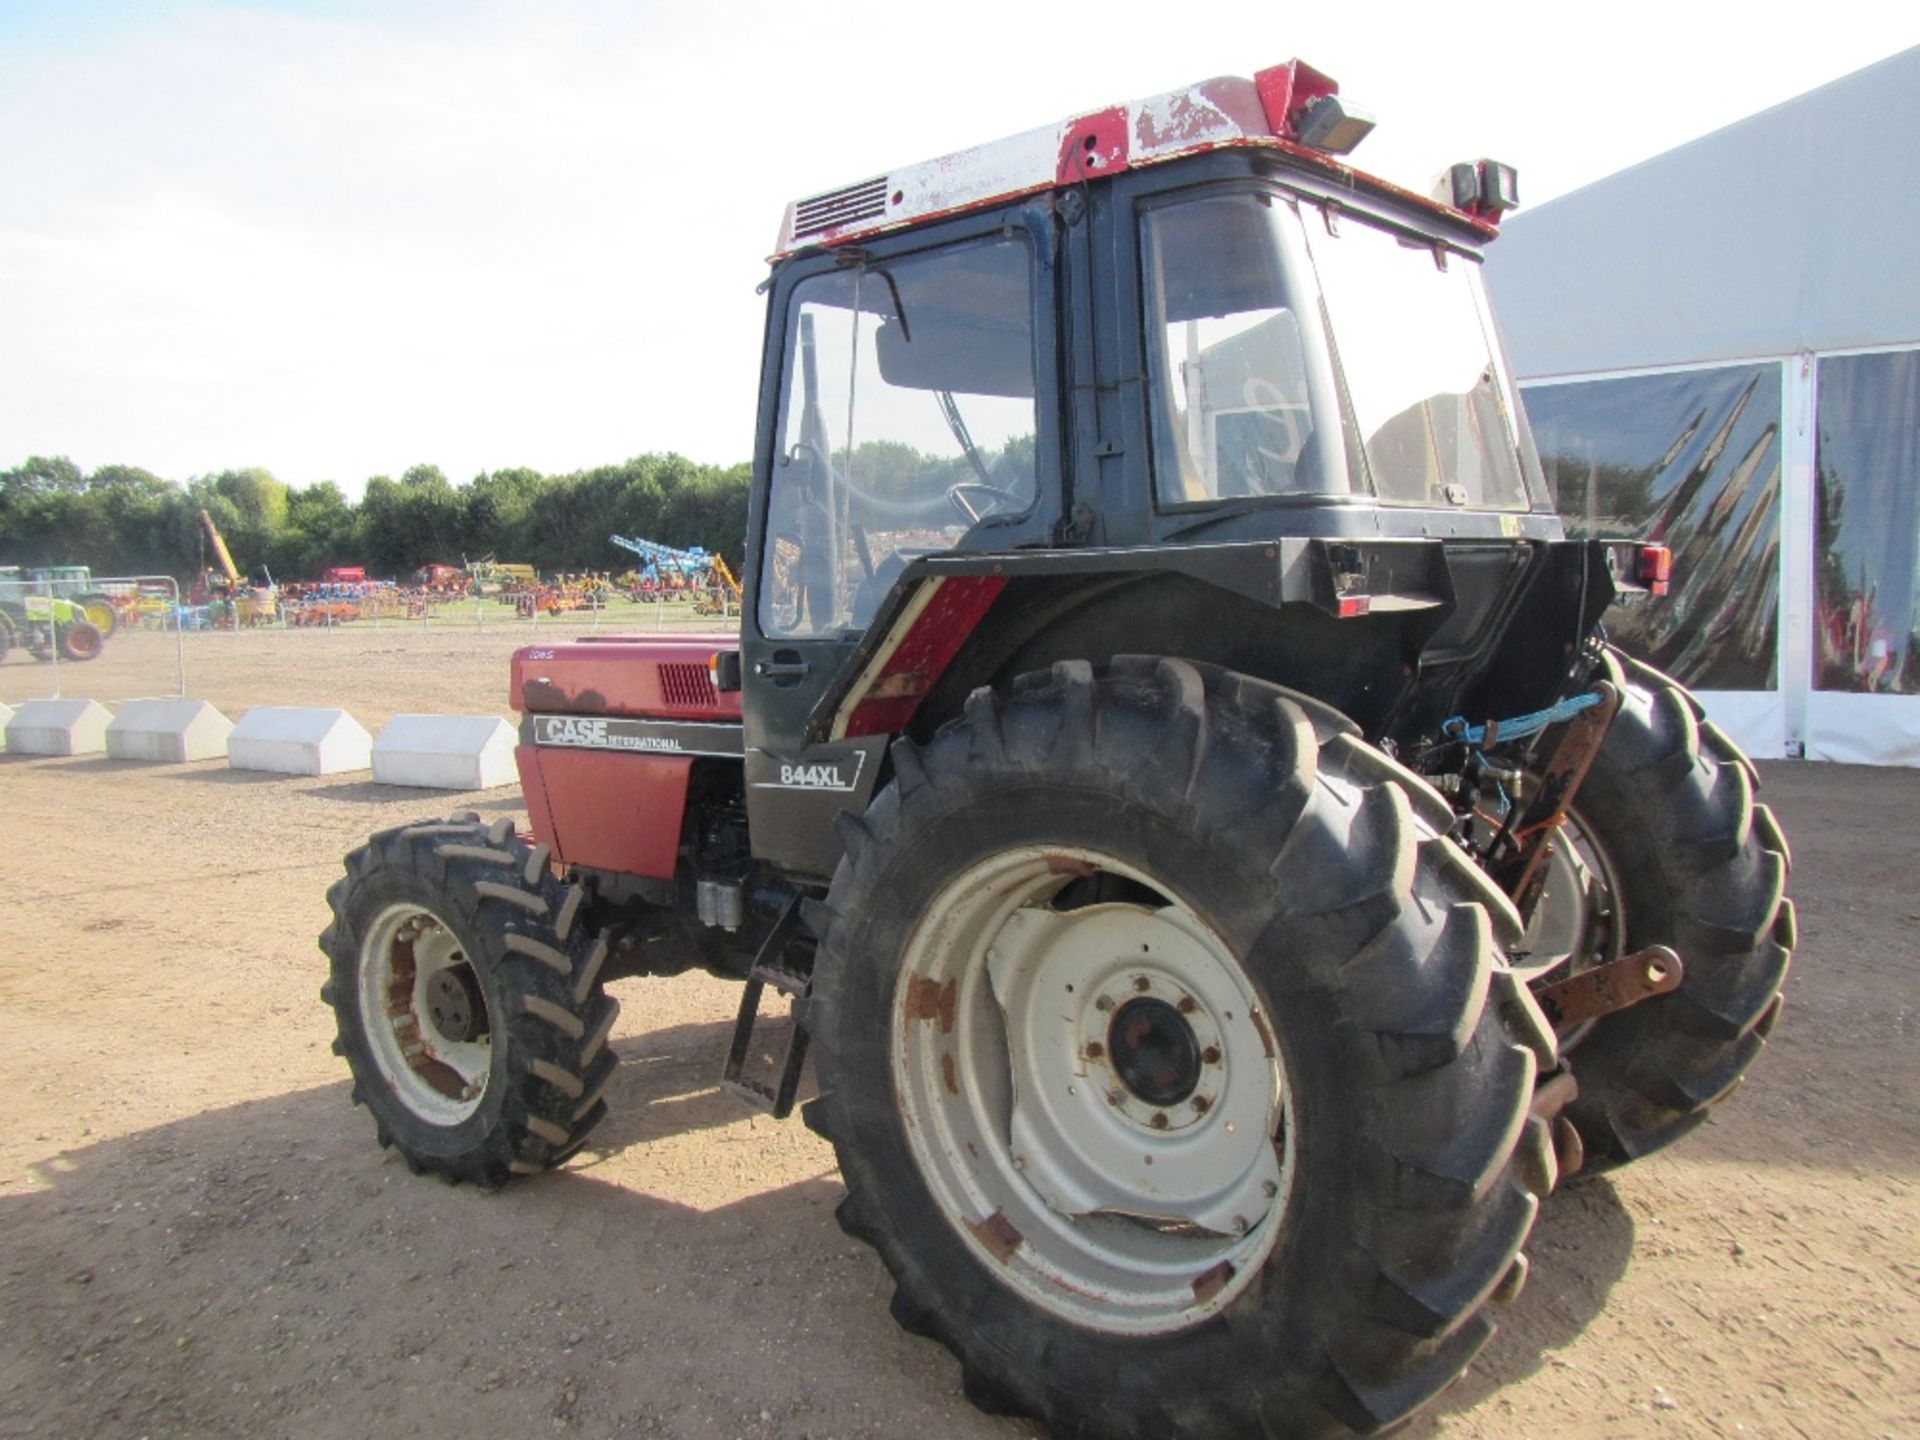 1992 Case International 844XL 4wd Tractor Reg. No. K394 PPV - Image 9 of 15